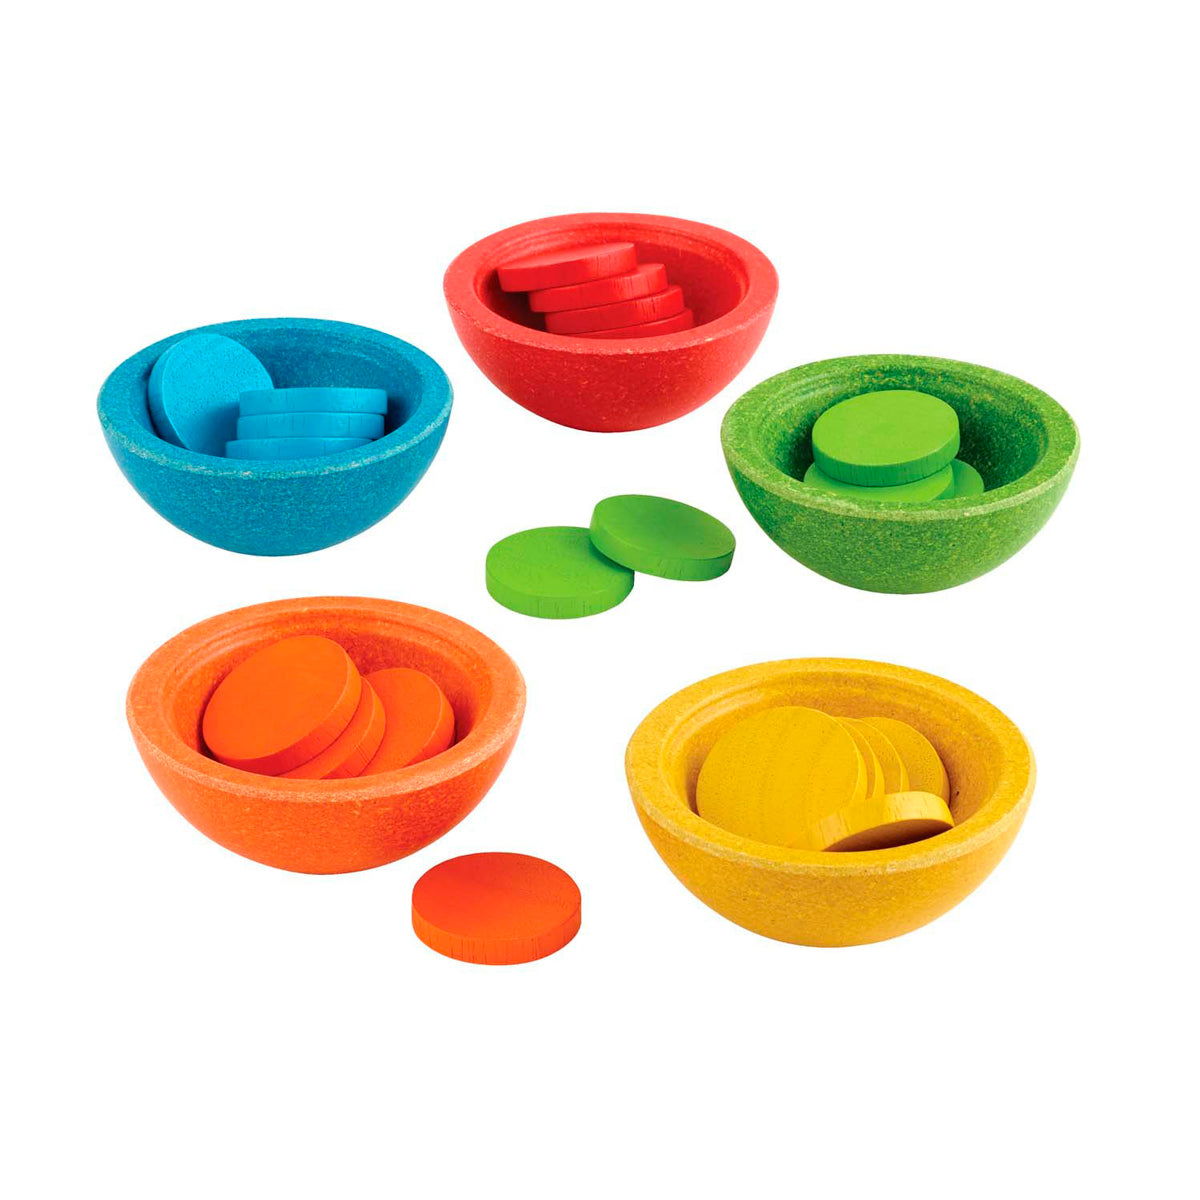 Pan toys Sort and Count Cups Montessori colour matching game